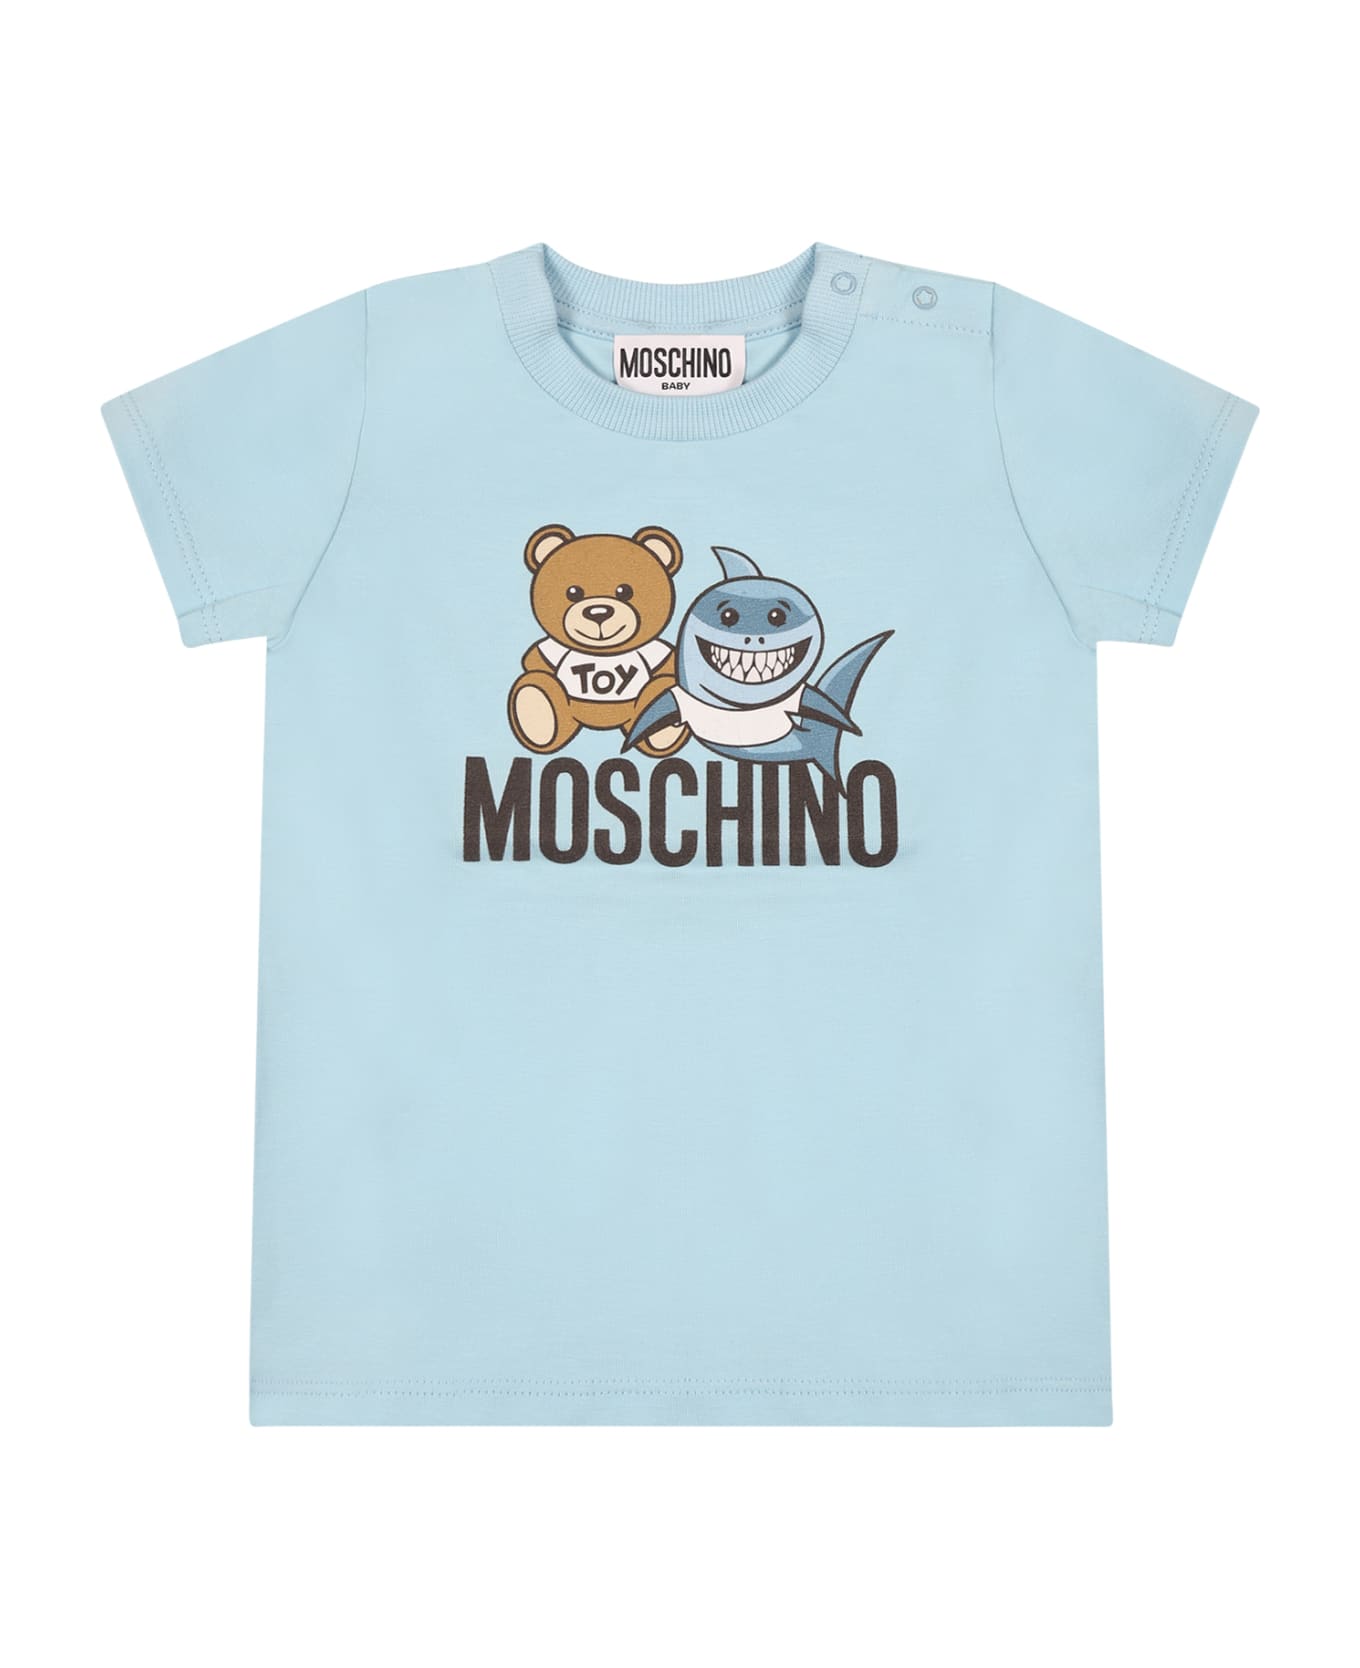 Moschino Toy Teddy Baby Girls Outfit, Age 18-24 Months – V & G Luxe Boutique